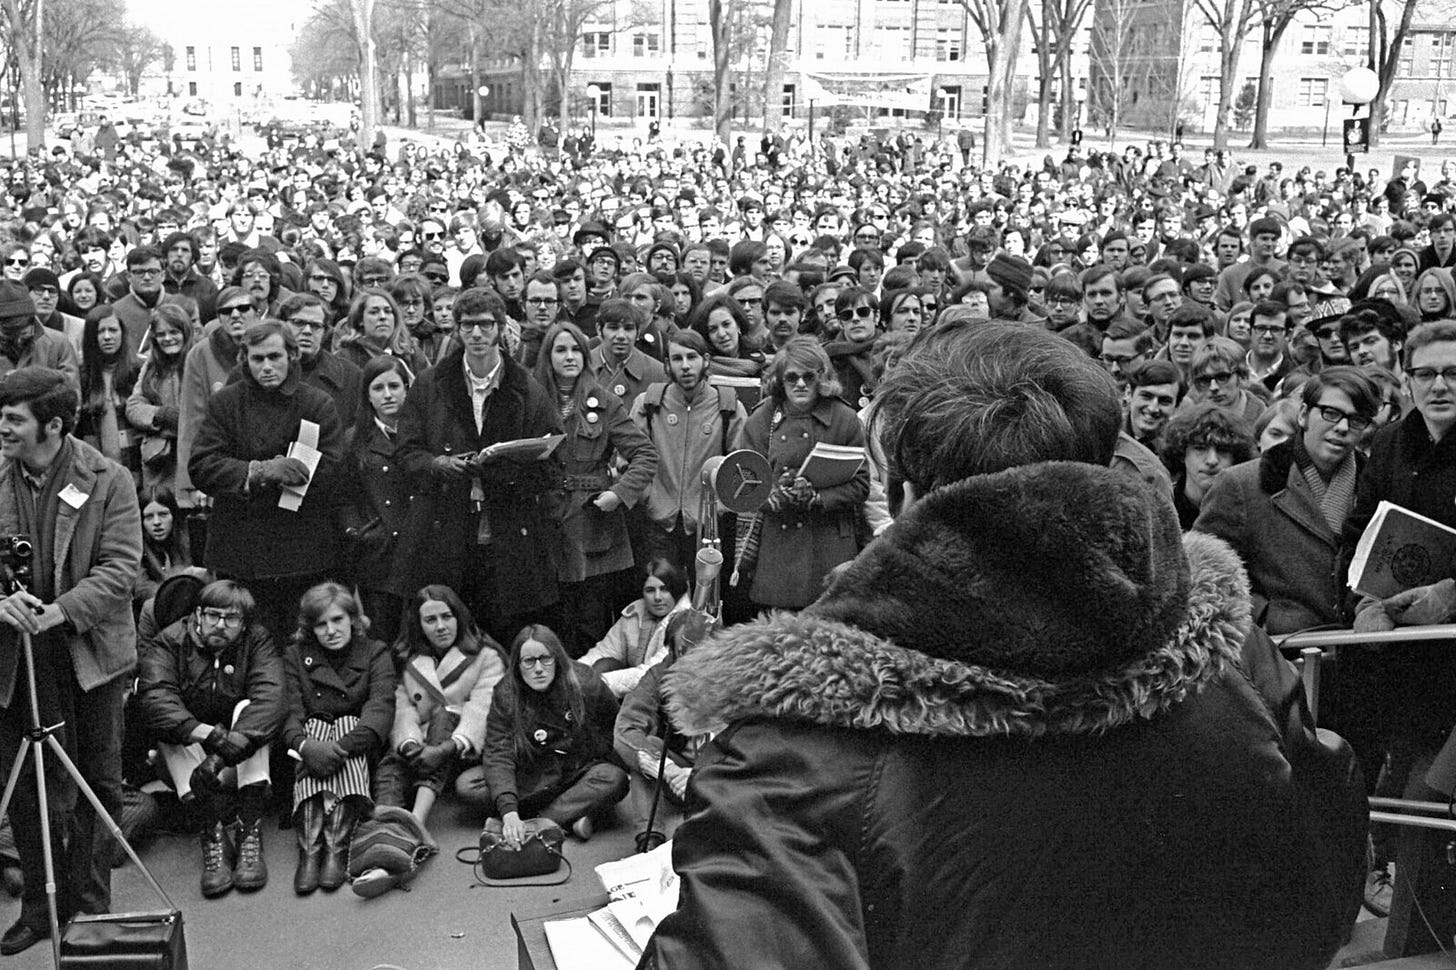 Black and white photo of a crowd at rally.